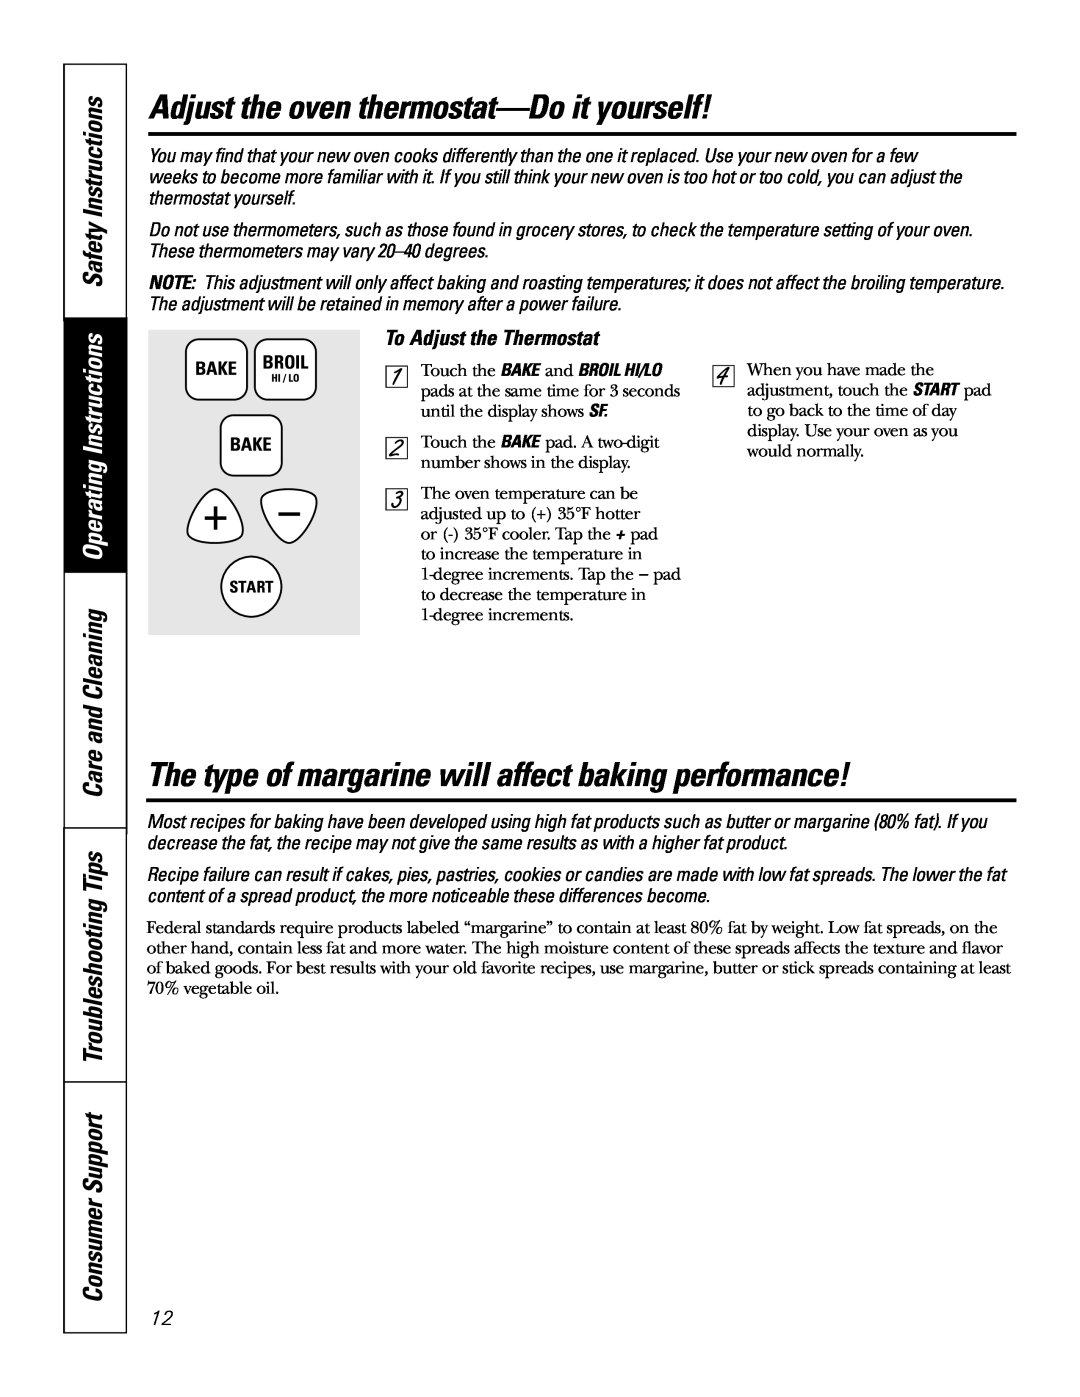 GE JRS0624 Adjust the oven thermostat-Doit yourself, and Cleaning Operating Instructions, To Adjust the Thermostat 